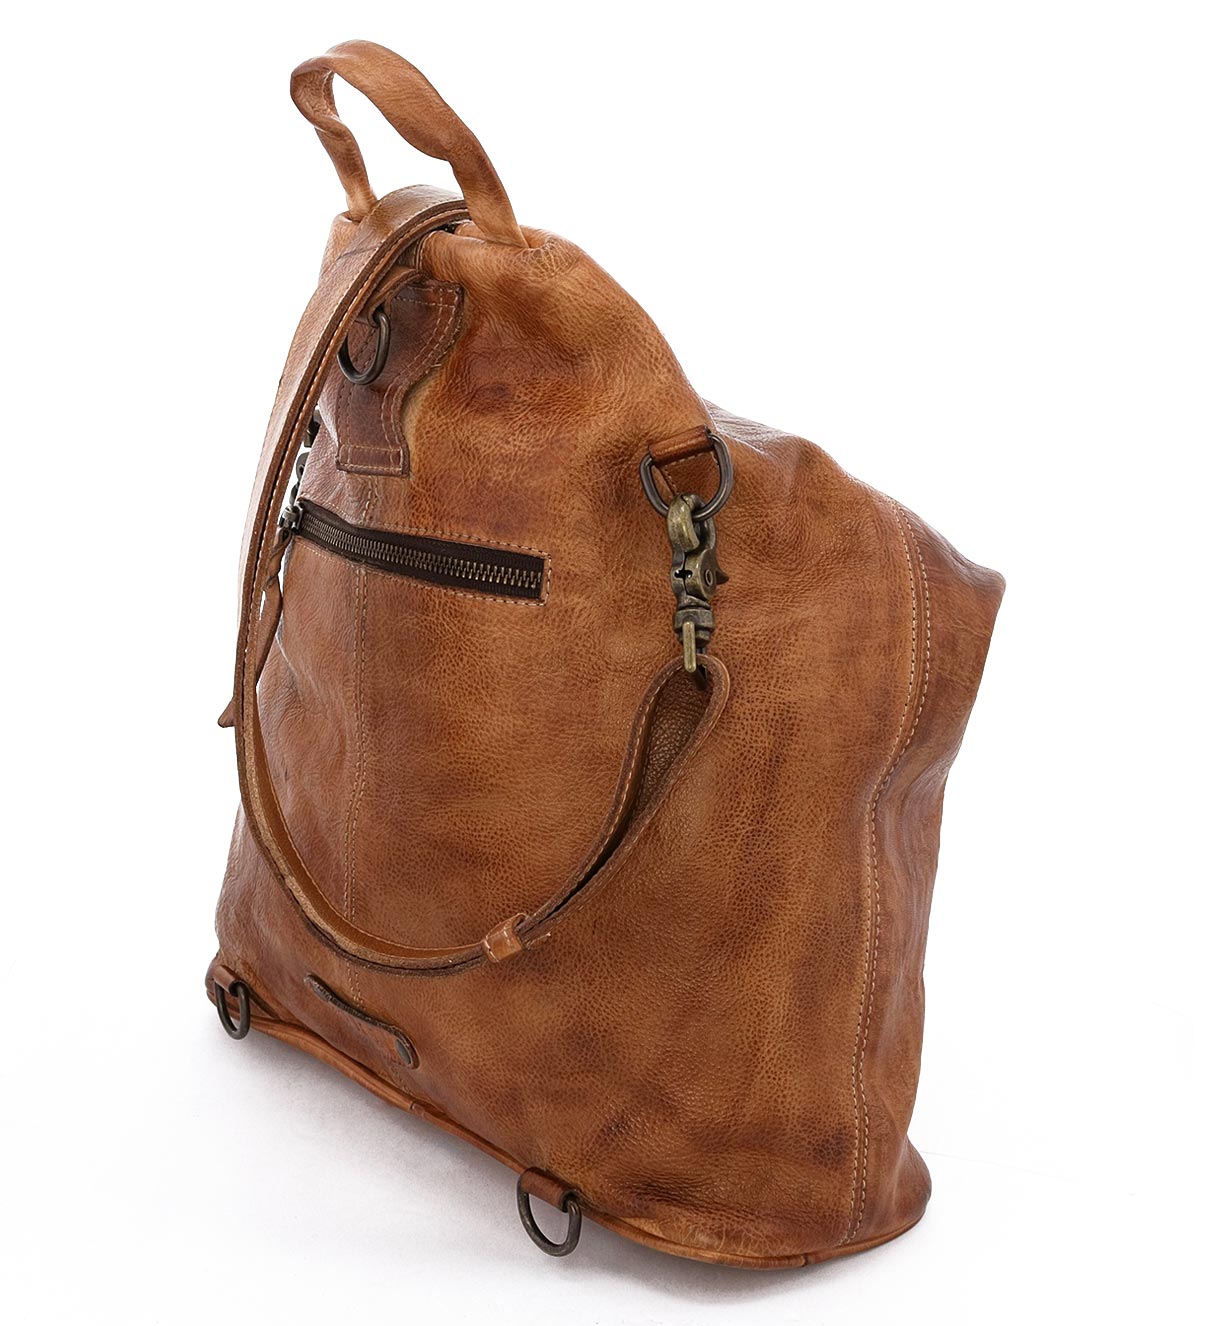 A brown leather Delta bag with straps and handles by Bed Stu.